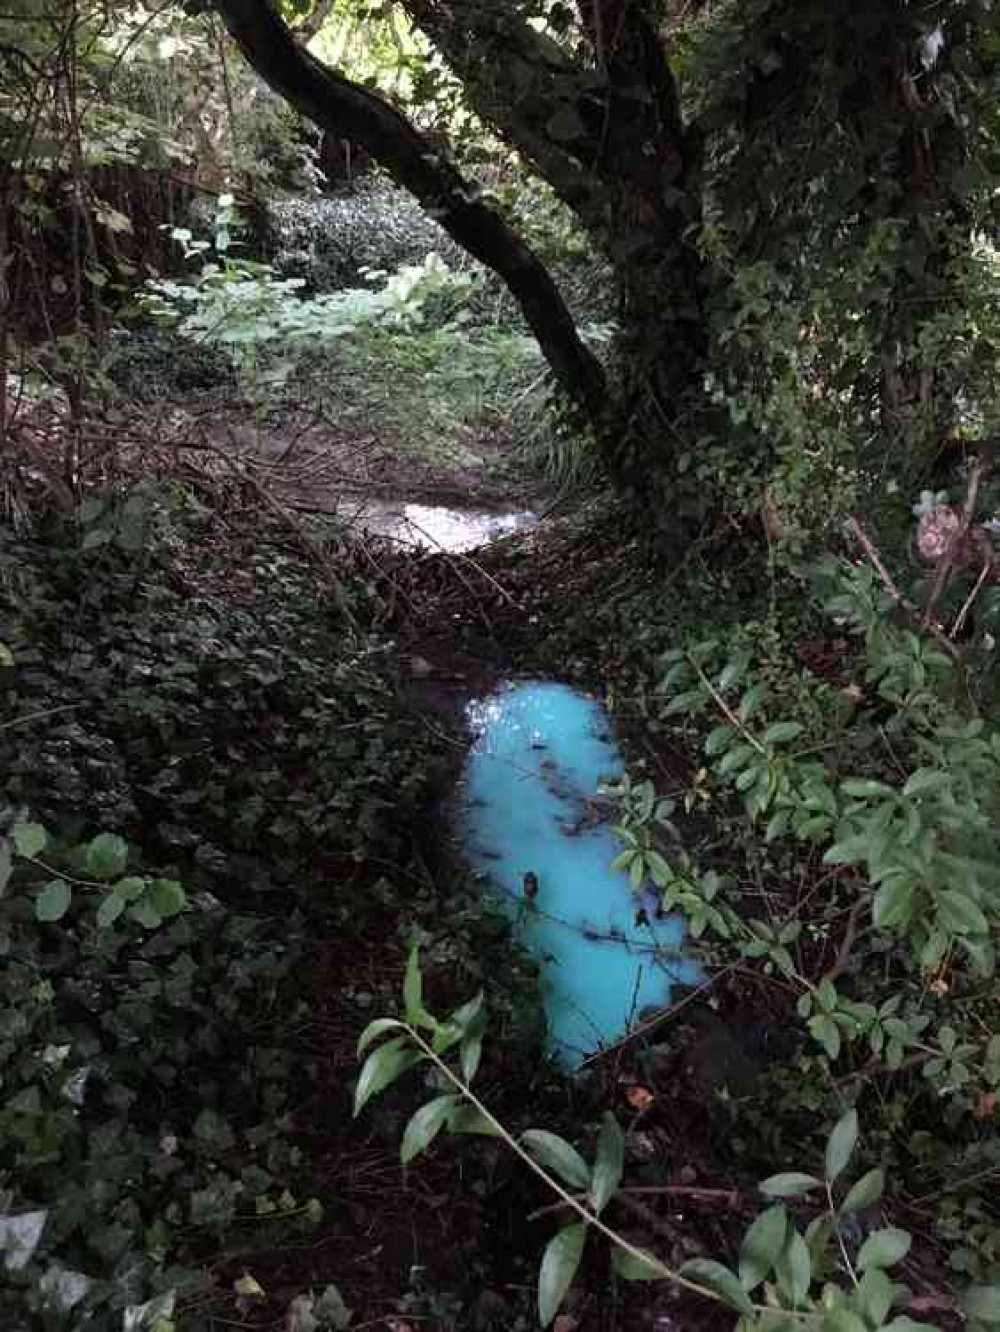 The river after it turned bright blue